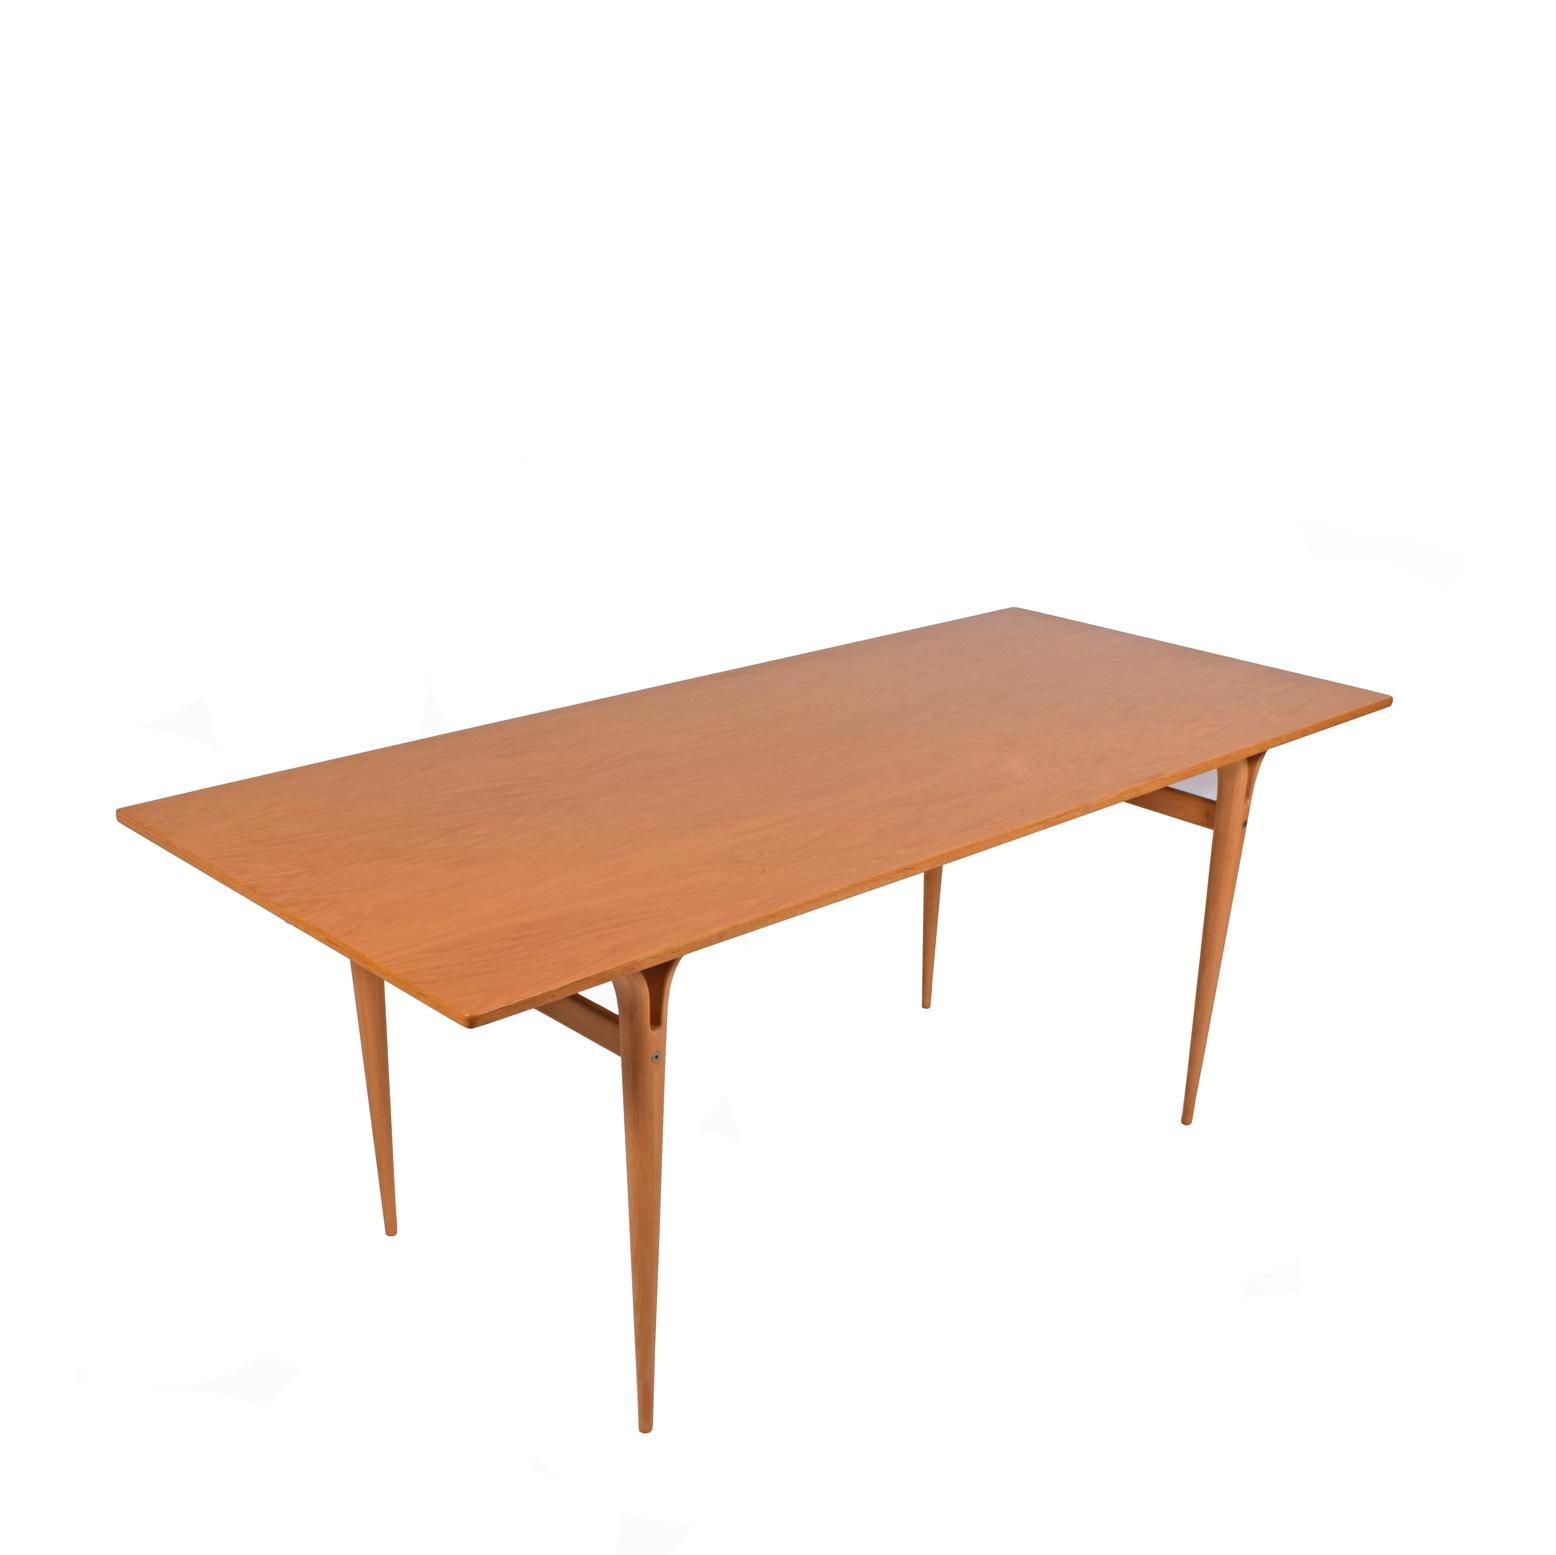 Table/desk oak top with beachwood laminating technic legs signed and dated.